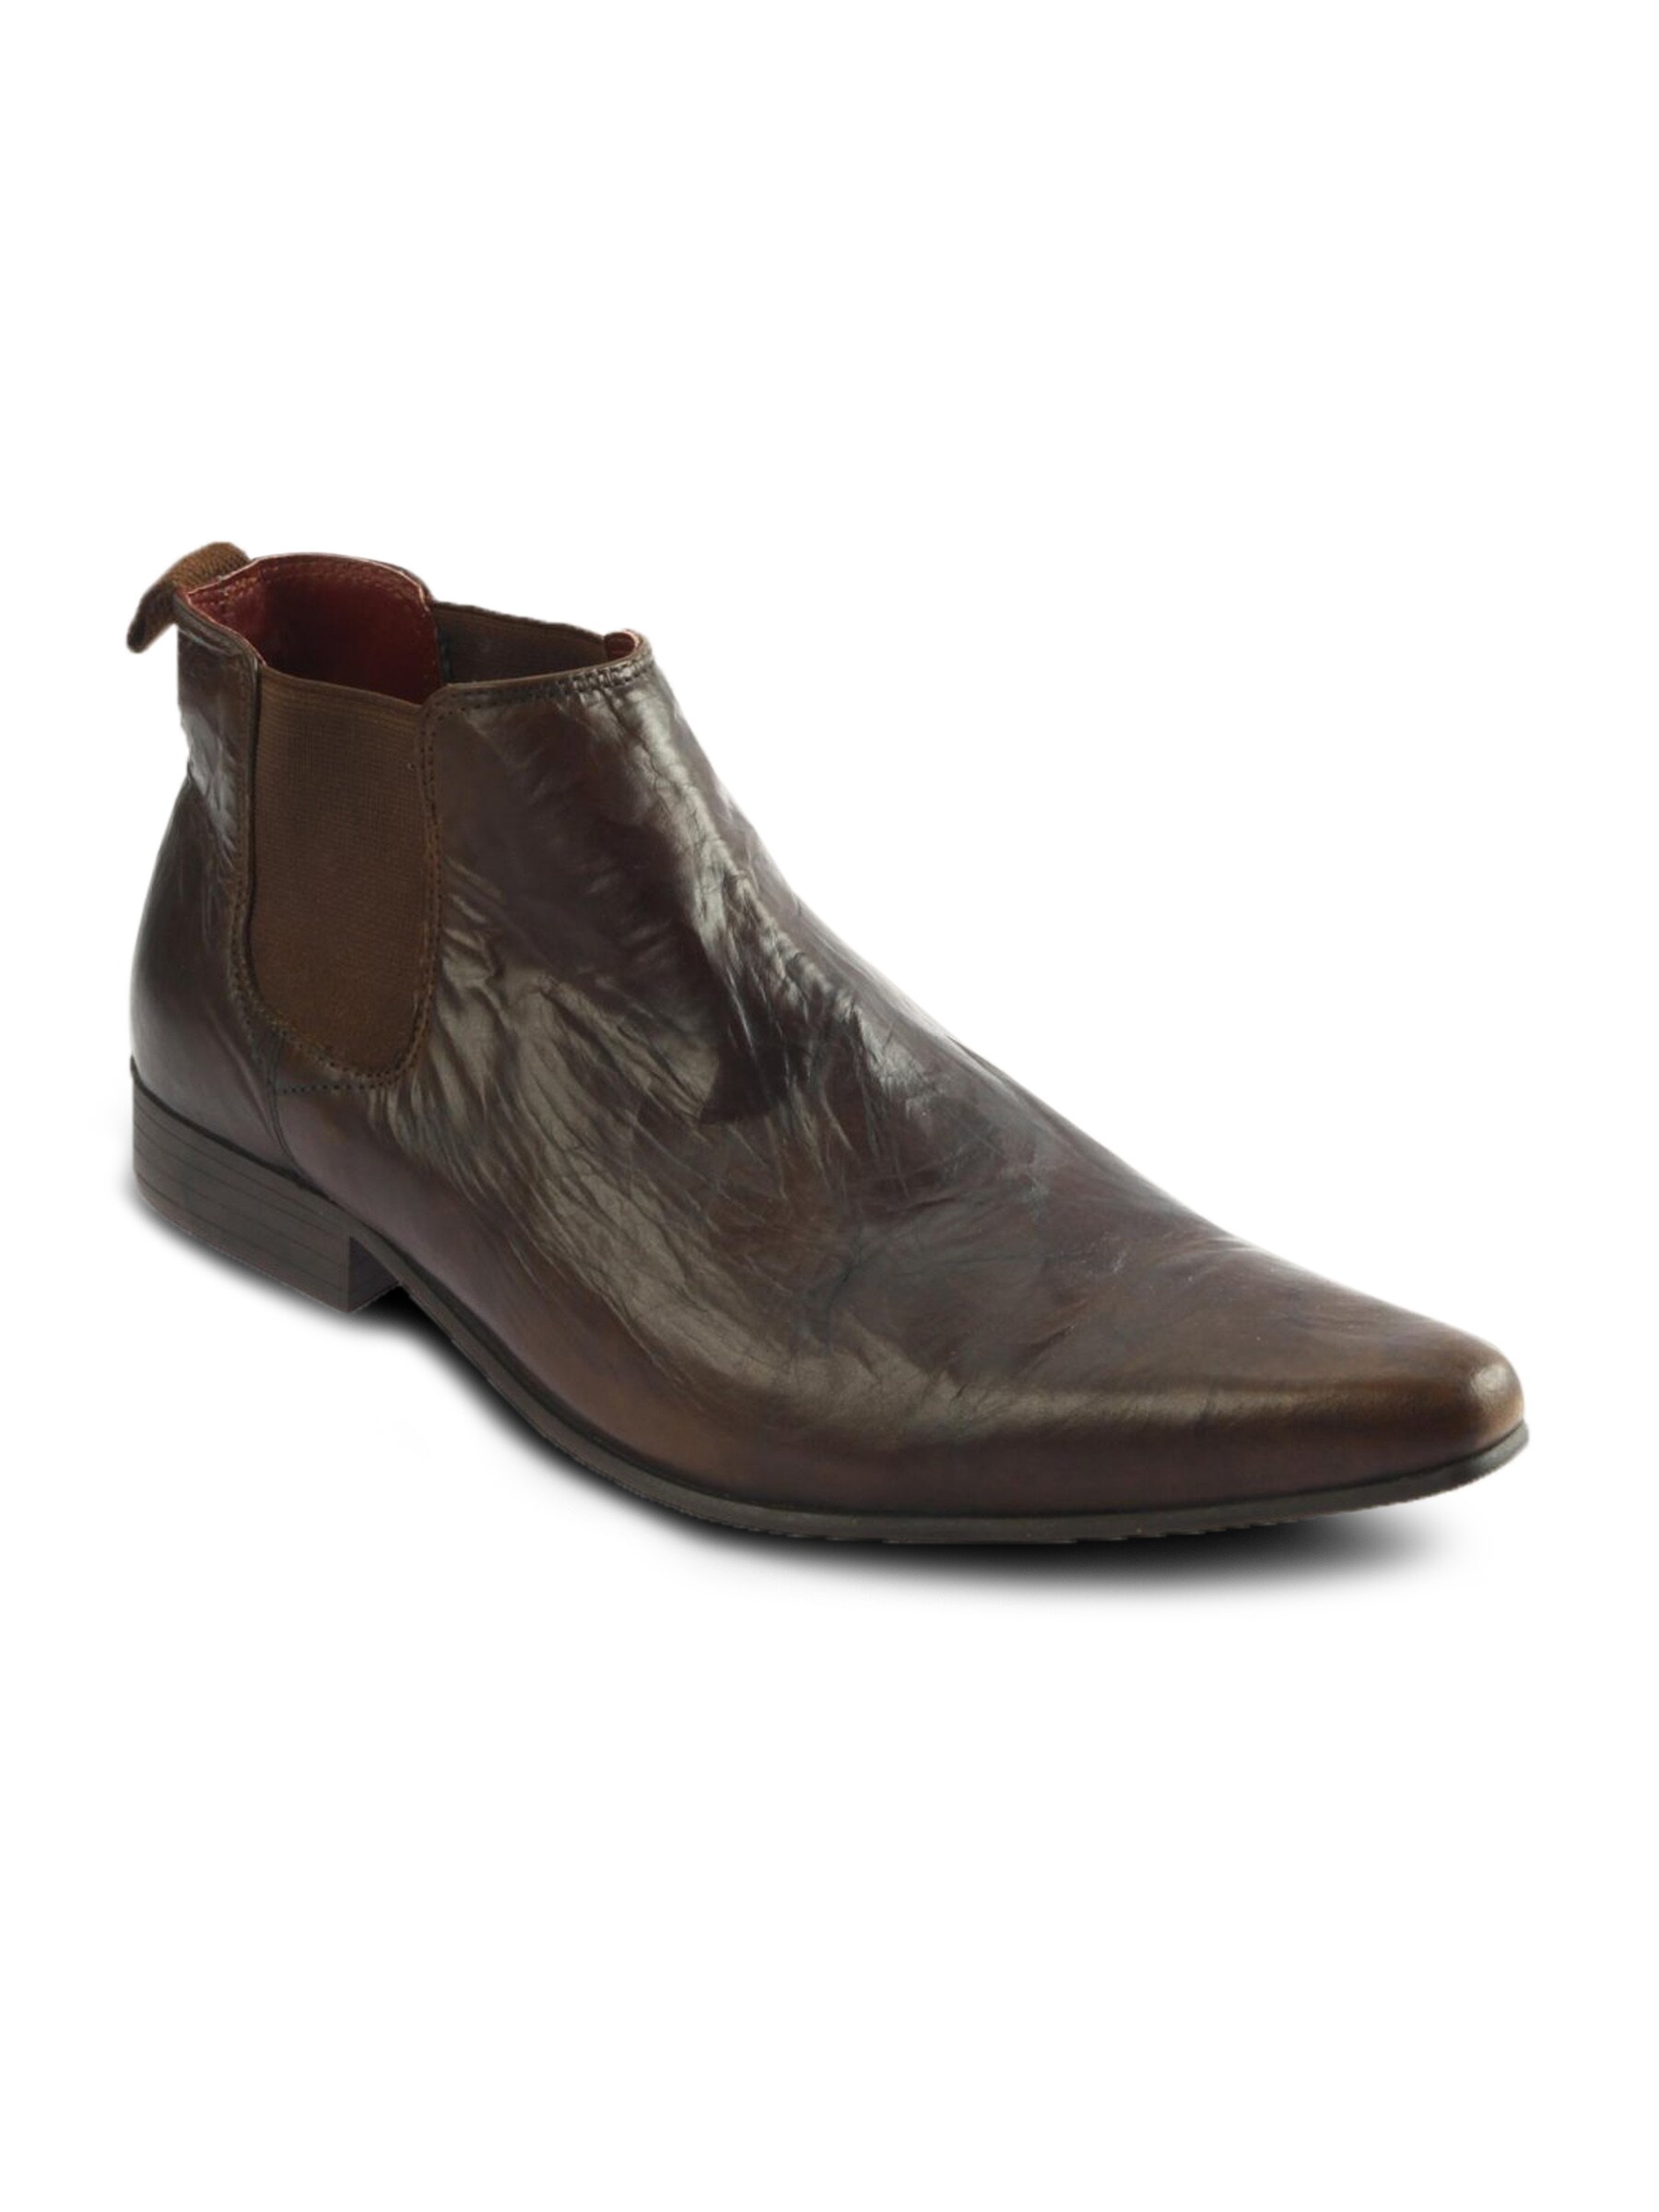 Red Tape Brown Casual Men's Shoe